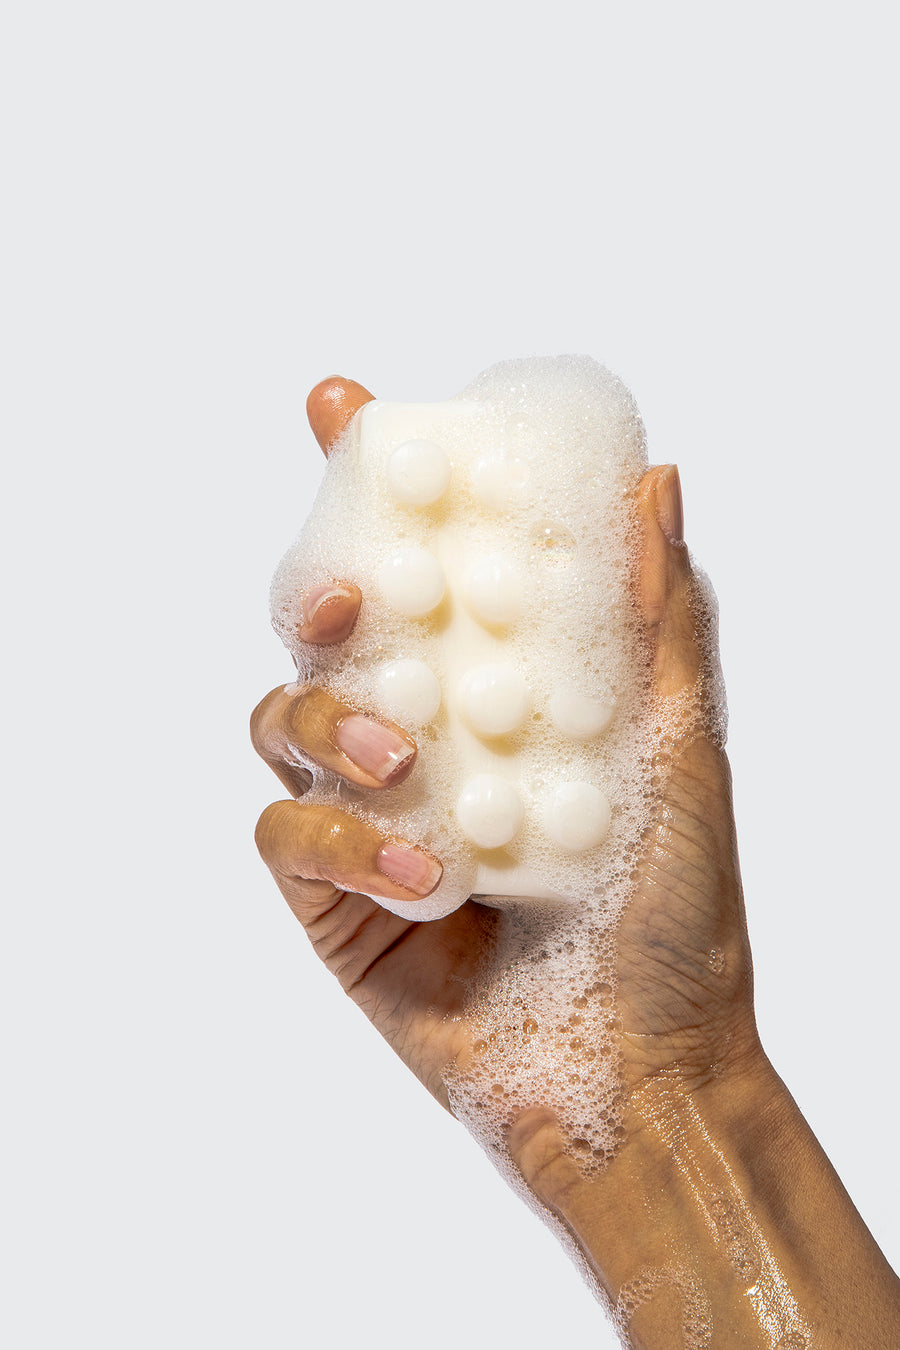 Hand holding bar of soap with white foamy suds dripping down